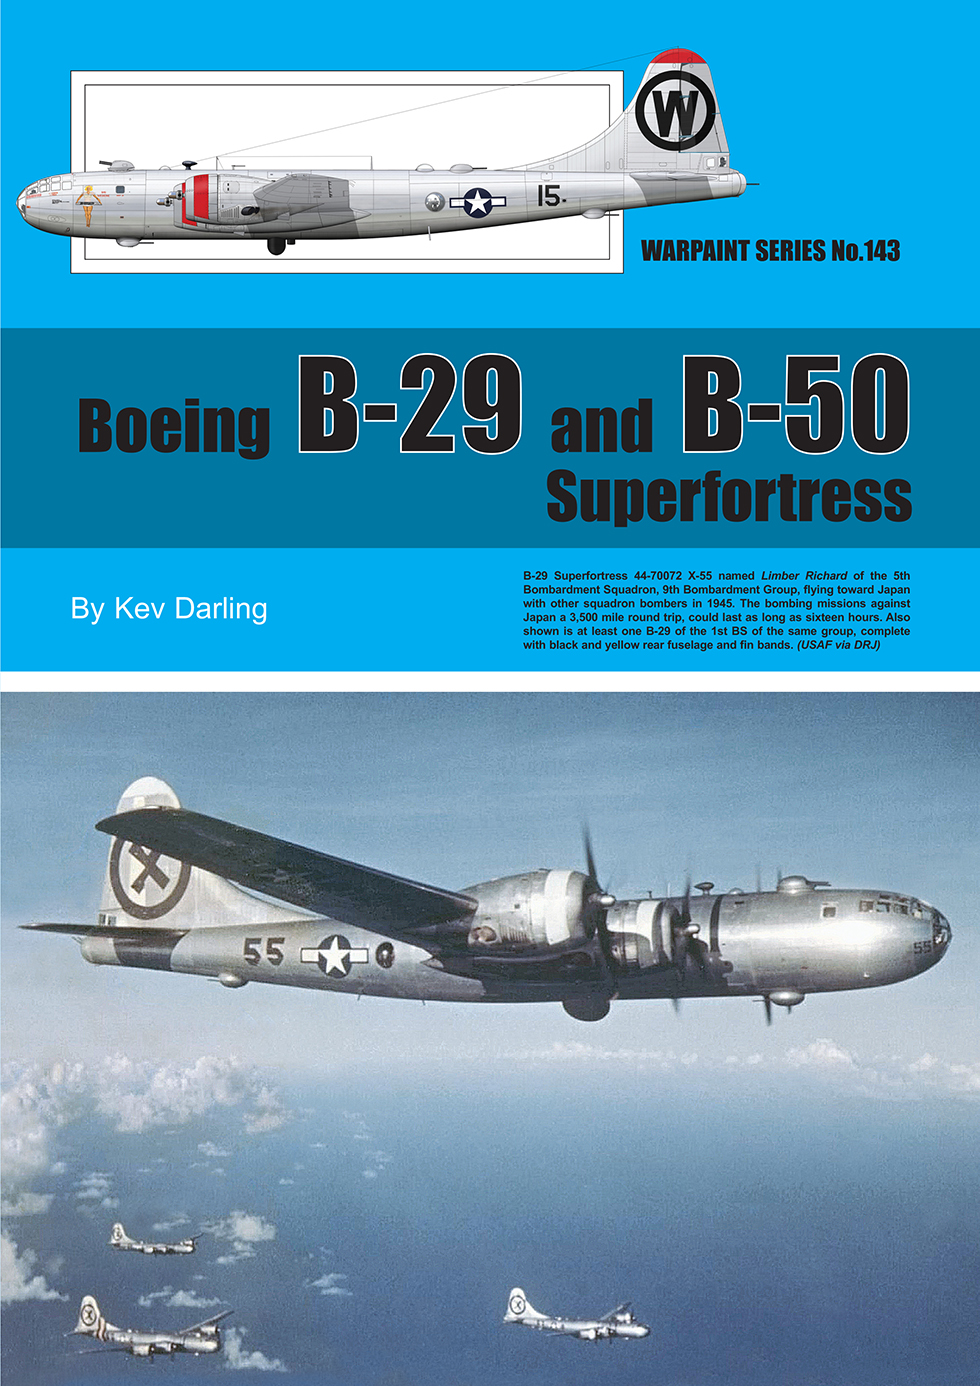 Guideline Publications Ltd Warpaint 143 Boeing B-29 and B-50 Superfortress - PRE ORDER 